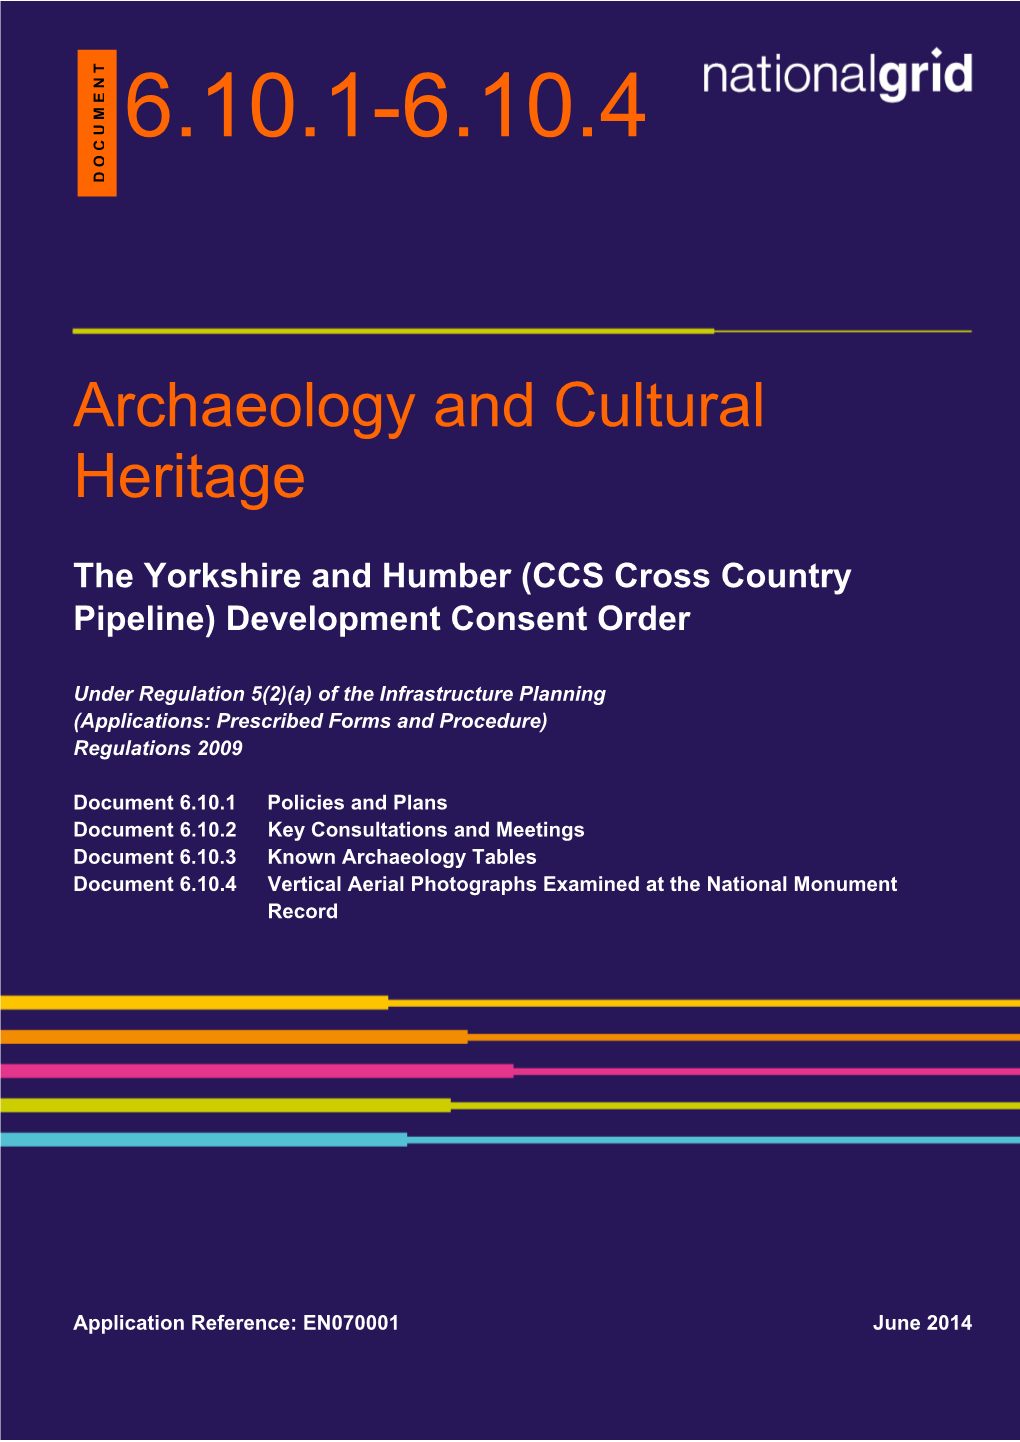 Archaeology and Cultural Heritage 2 Environmental Statement Document 6.10.1